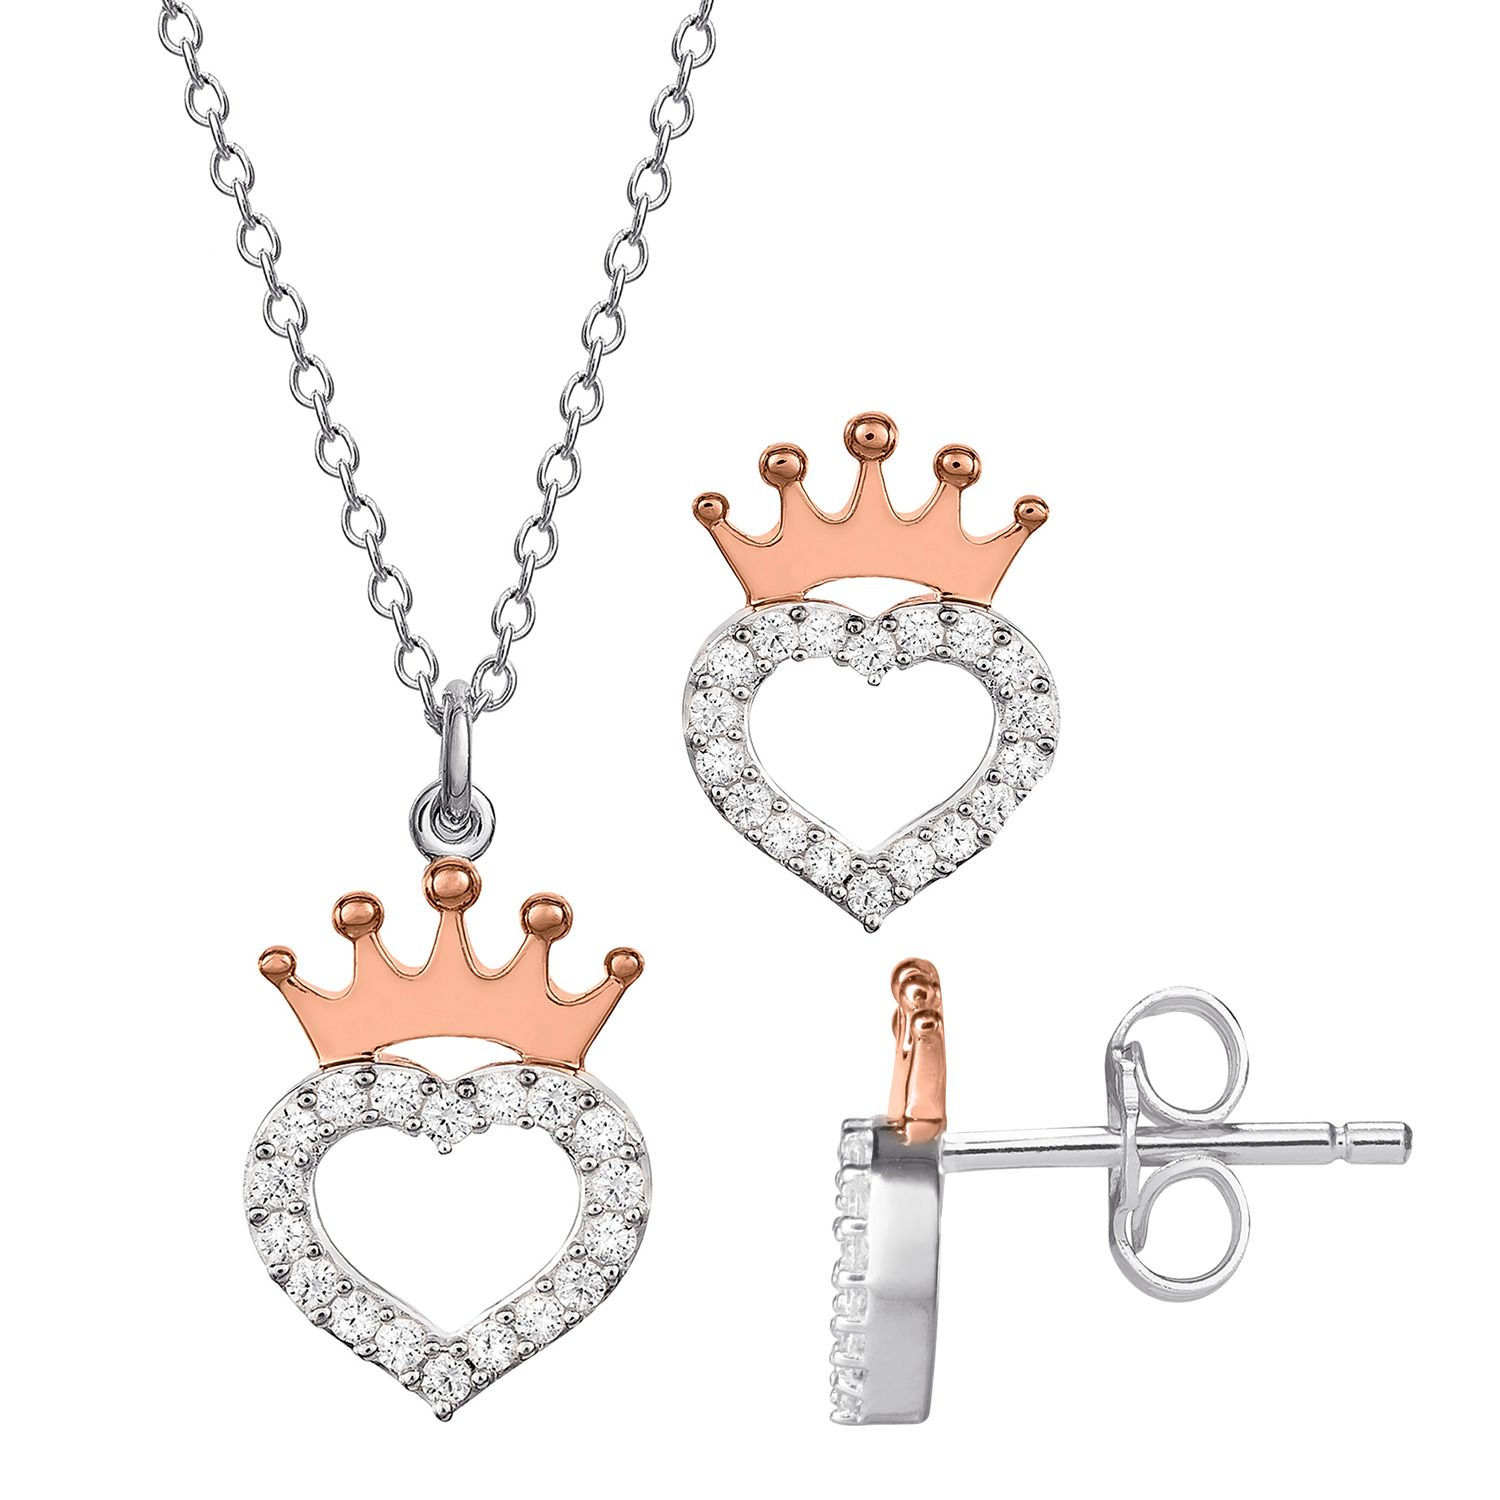 Image for Disney Princess Two-Tone Heart Crown Pendant Necklace & Stud Earring Set at Kohl's.